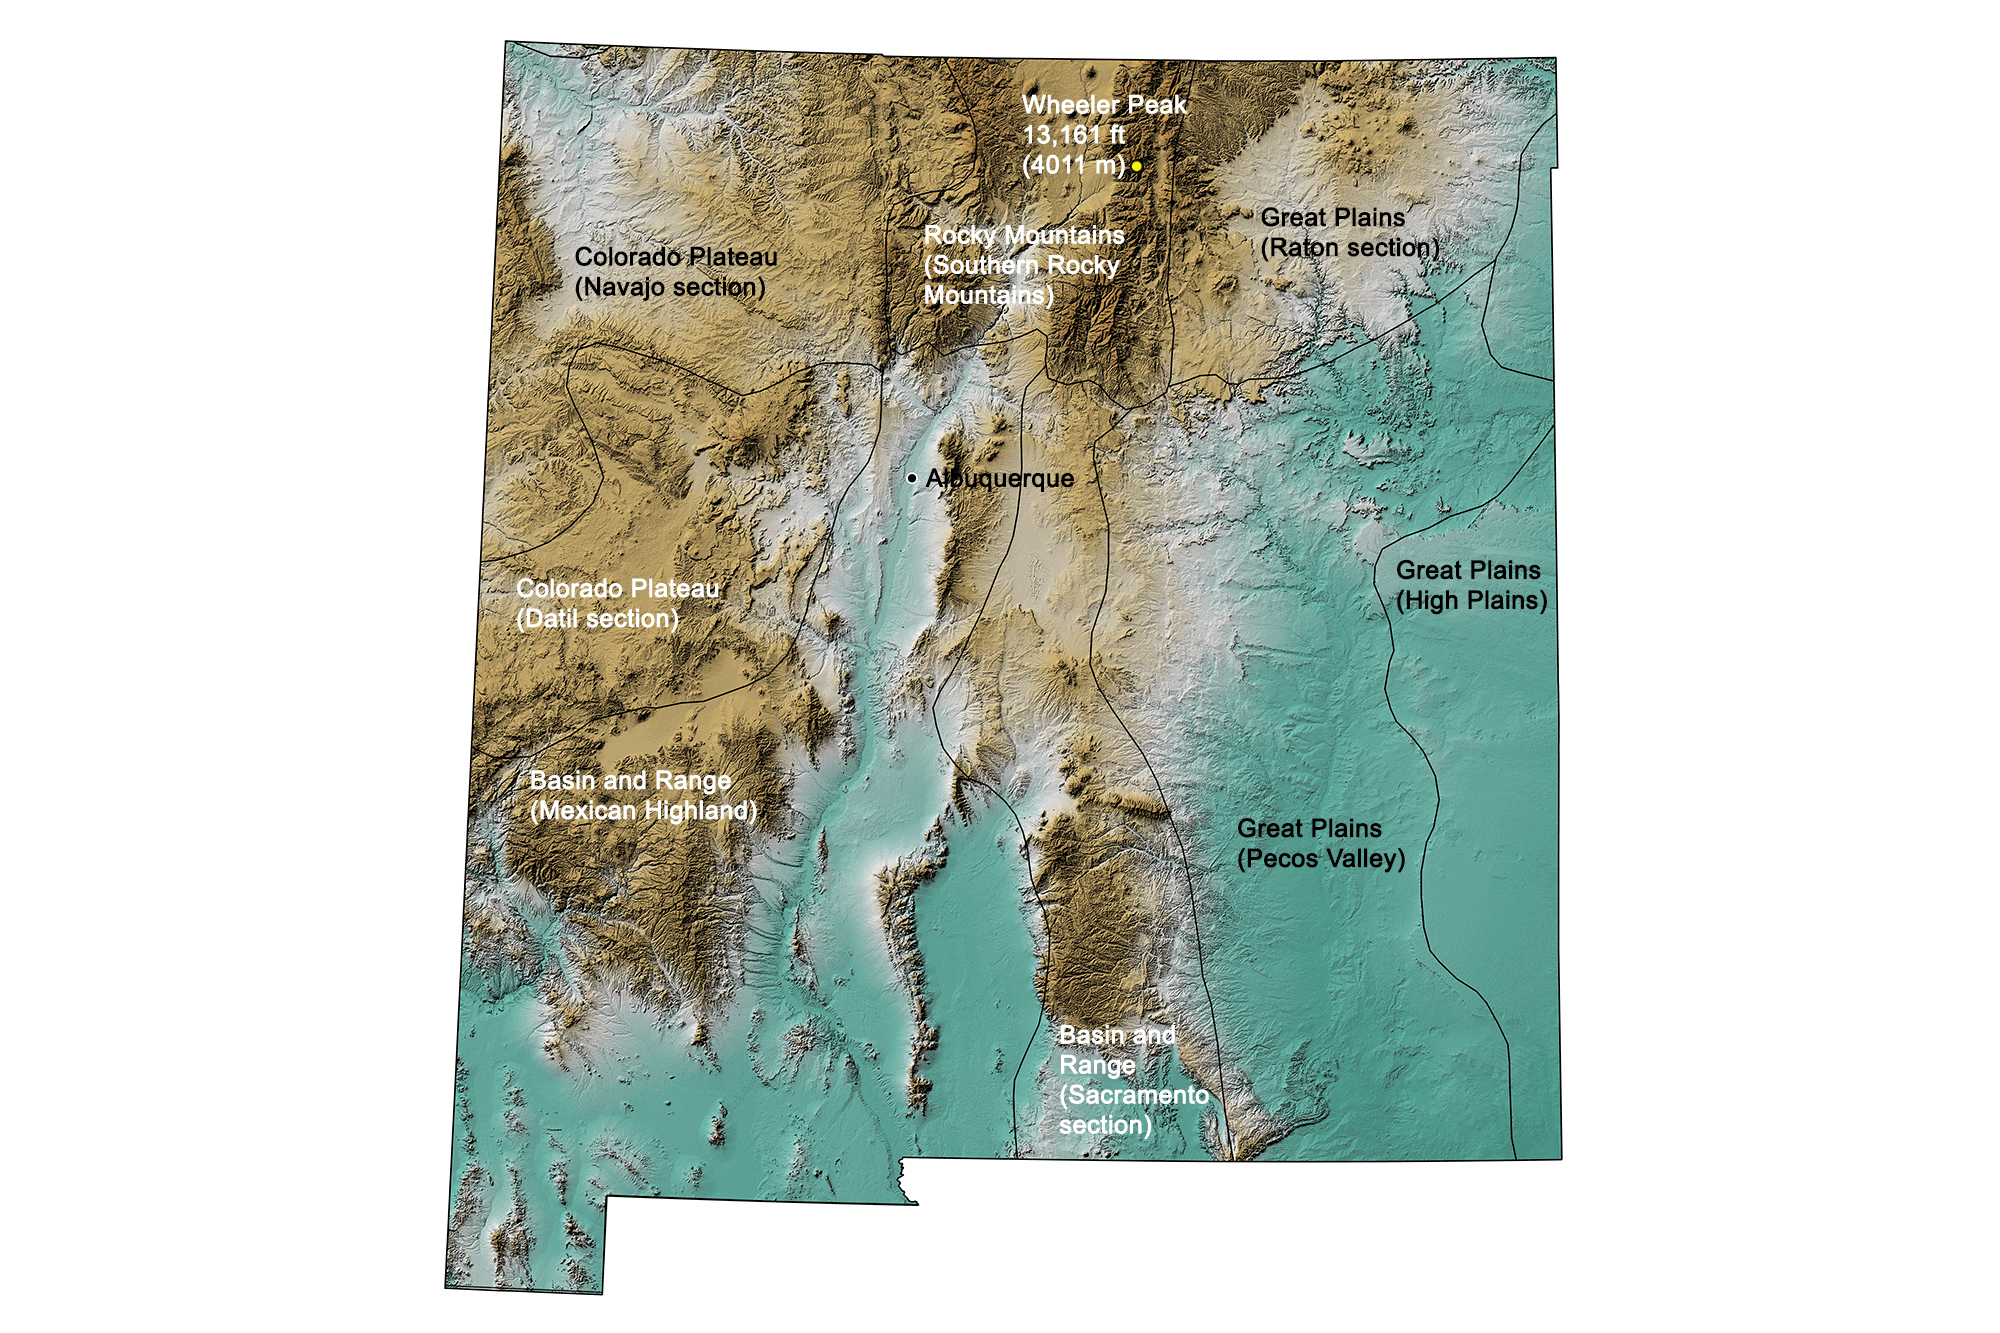 Topographic map of New Mexico.